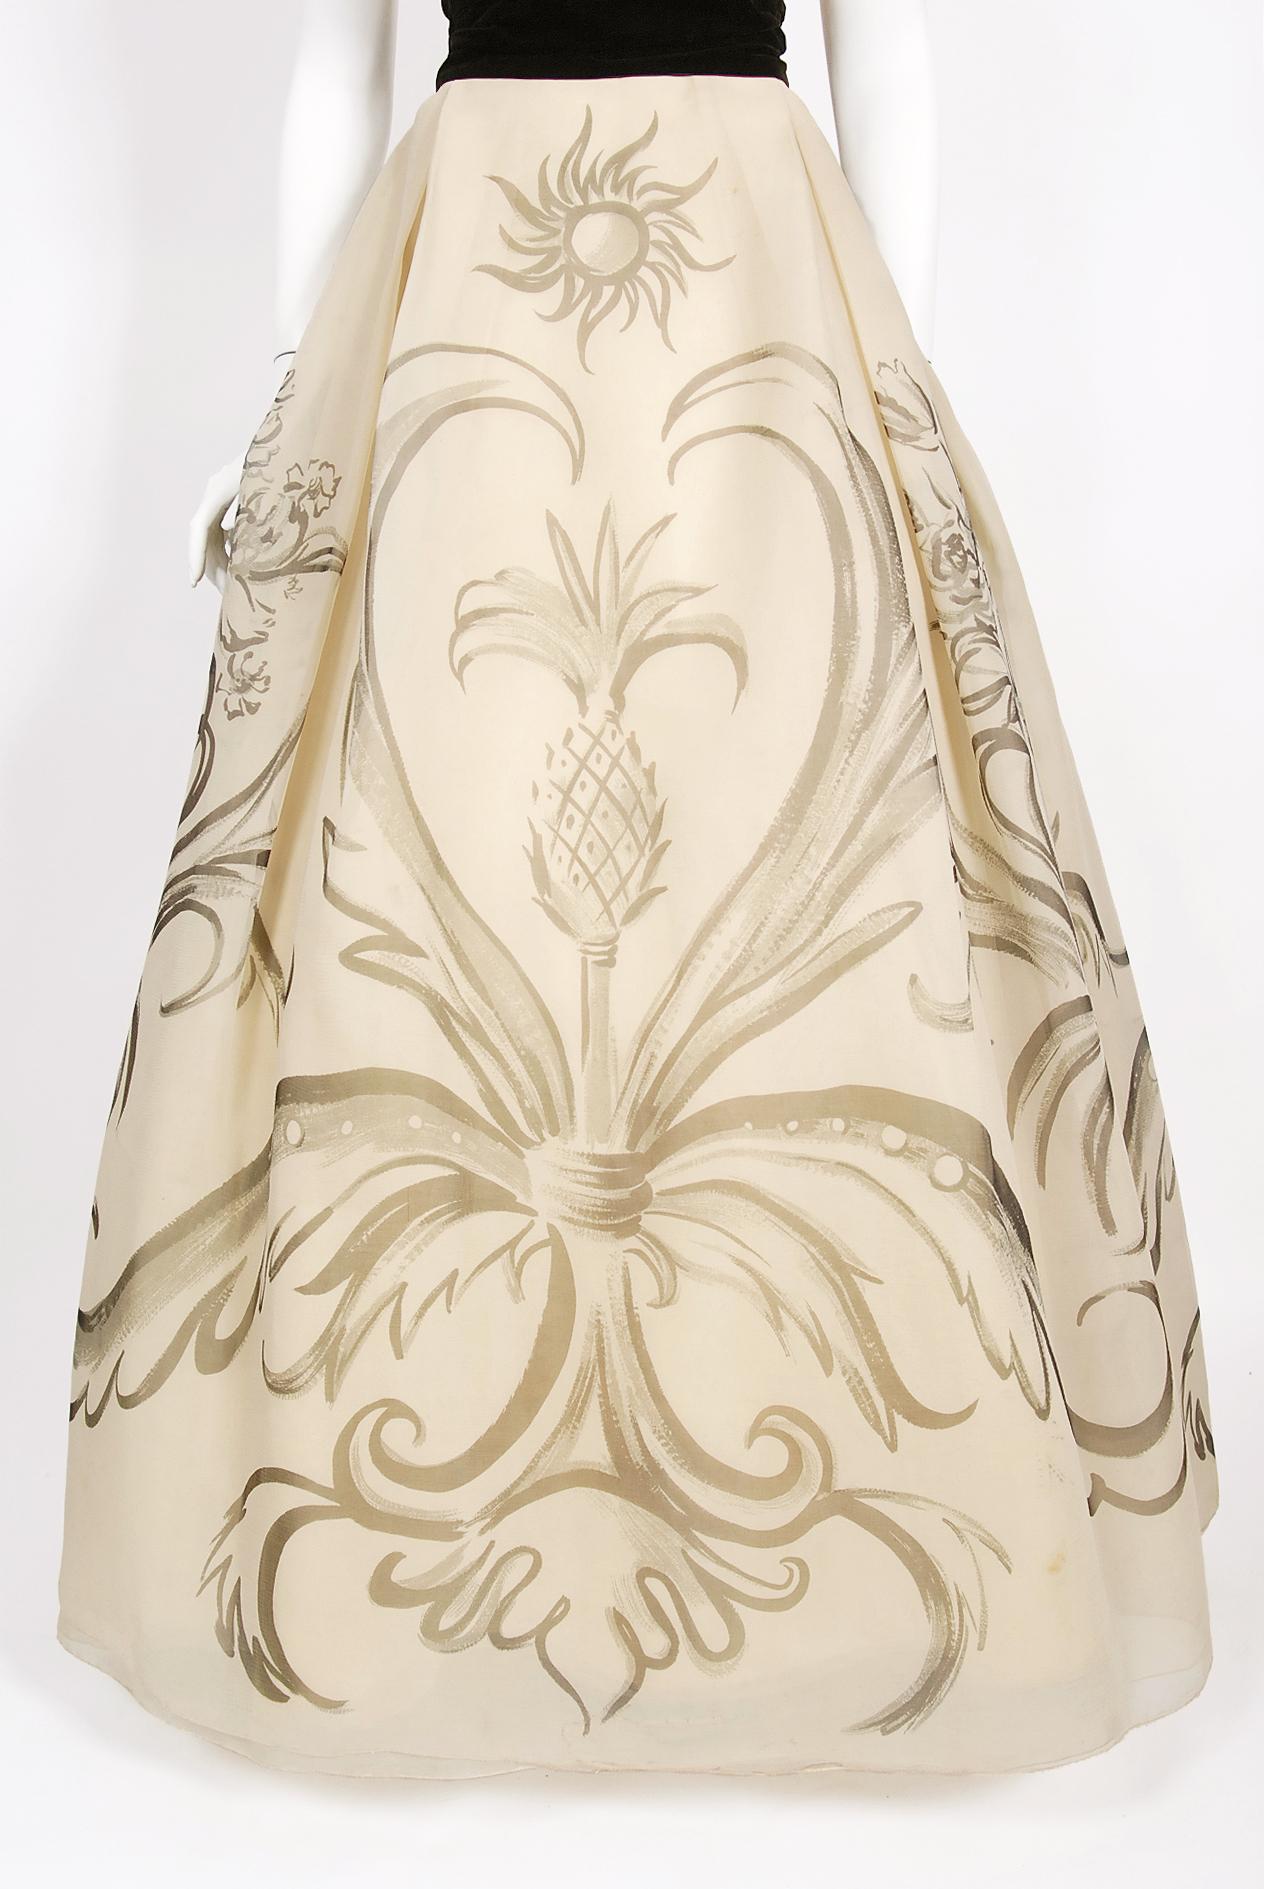 Women's Vintage 1950's Hattie Carnegie Couture Whimsical Hand-Painted Cream Silk Gown 